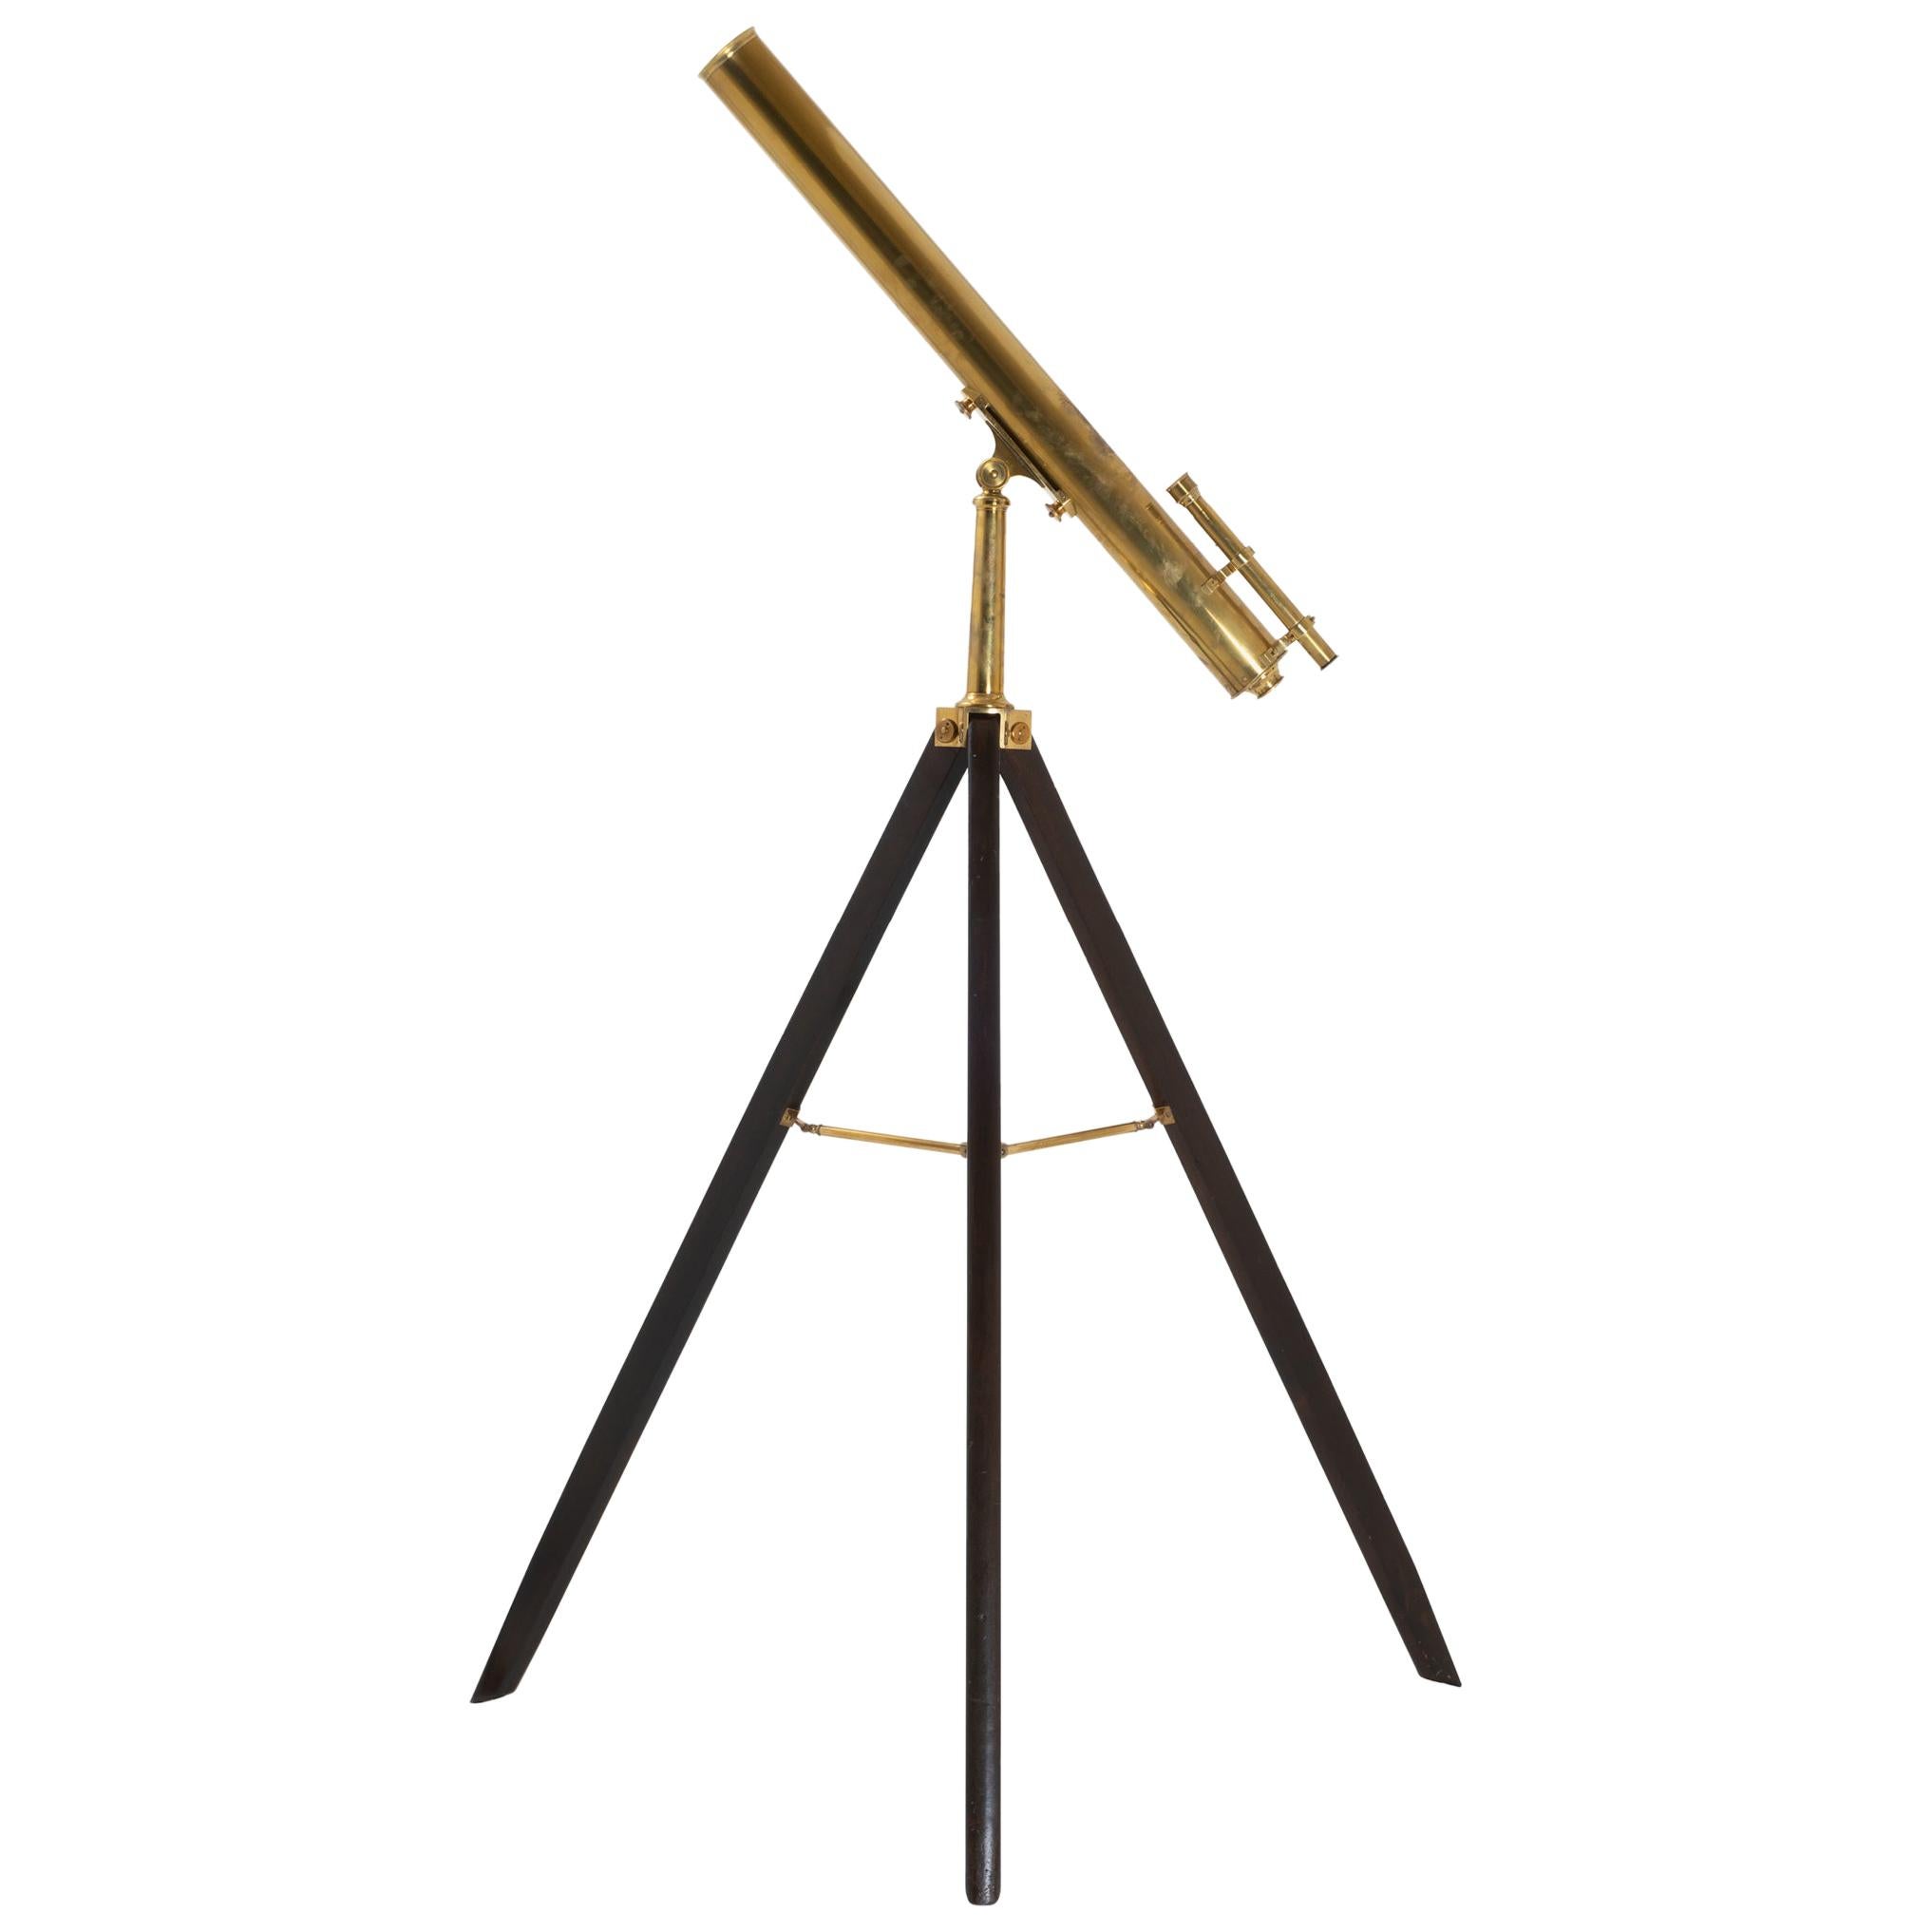 Vintage Brass Telescope on Mahogany Stand by Broadhurst Clarkson & Co. London